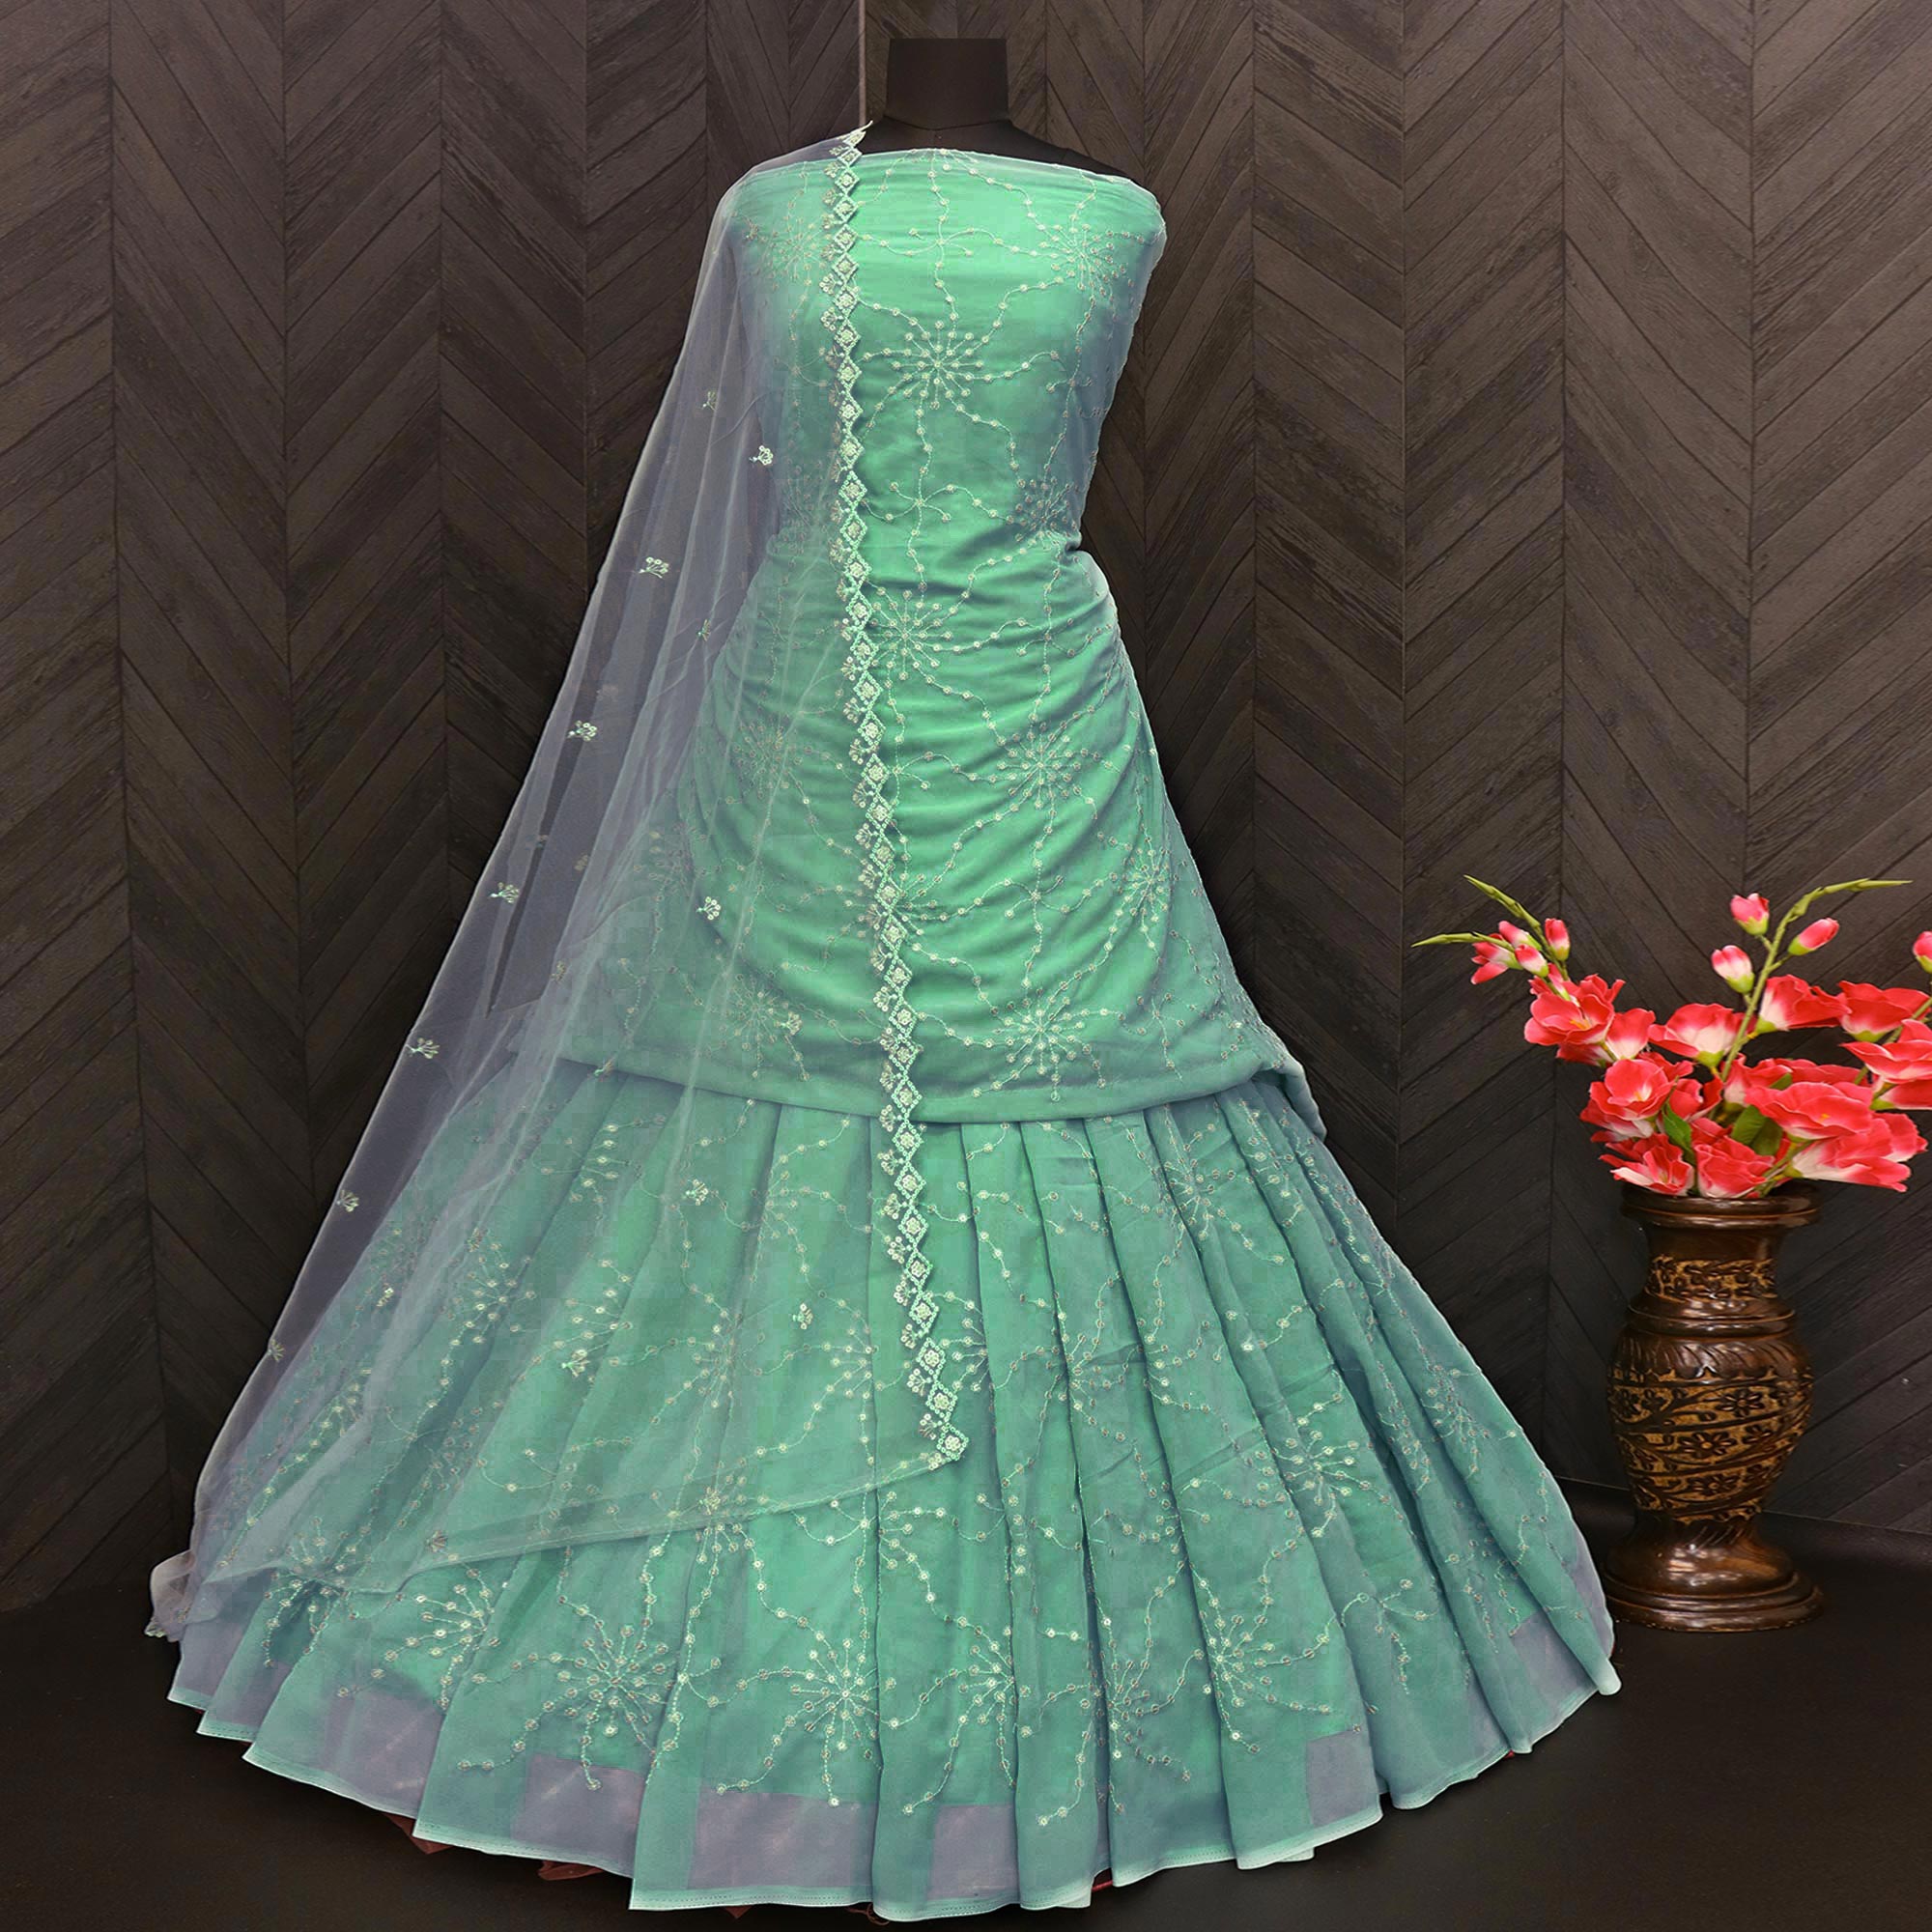 Sea Green Sequins Embroidered Georgette Semi Stitched Gharara Style Suit